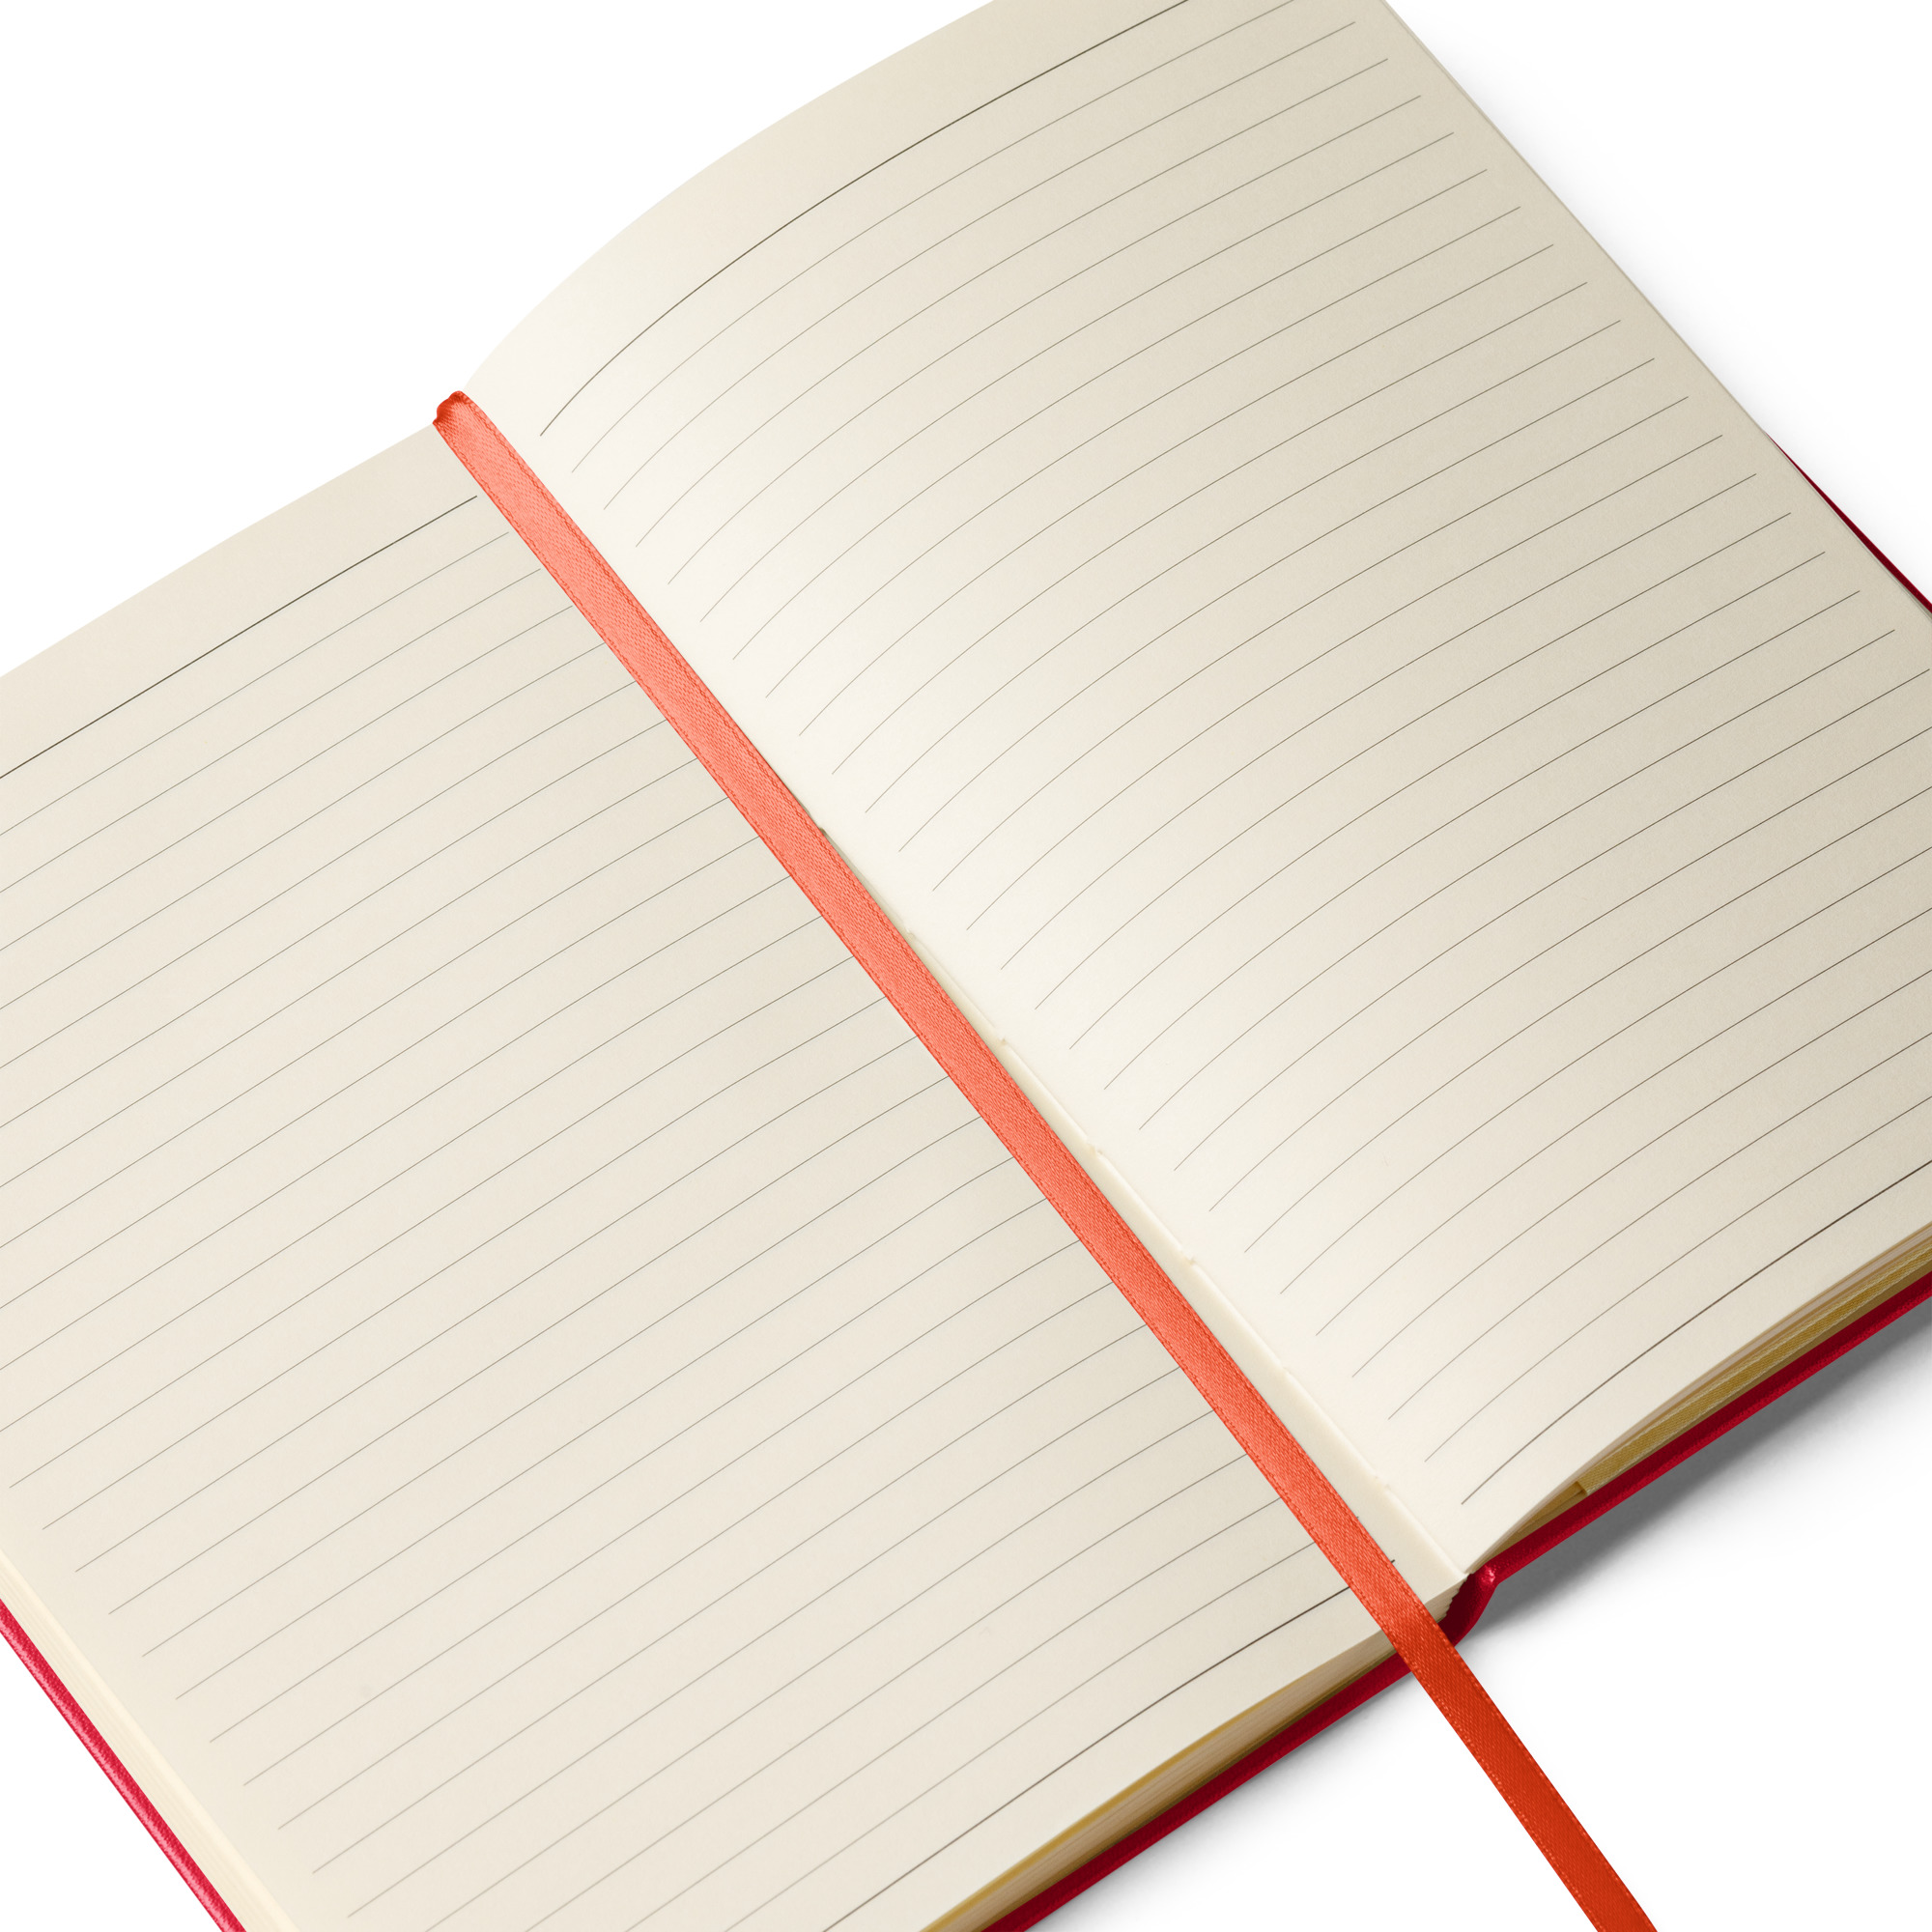 hardcover-bound-notebook-red-product-details-2-6537e6eef1b50.jpg